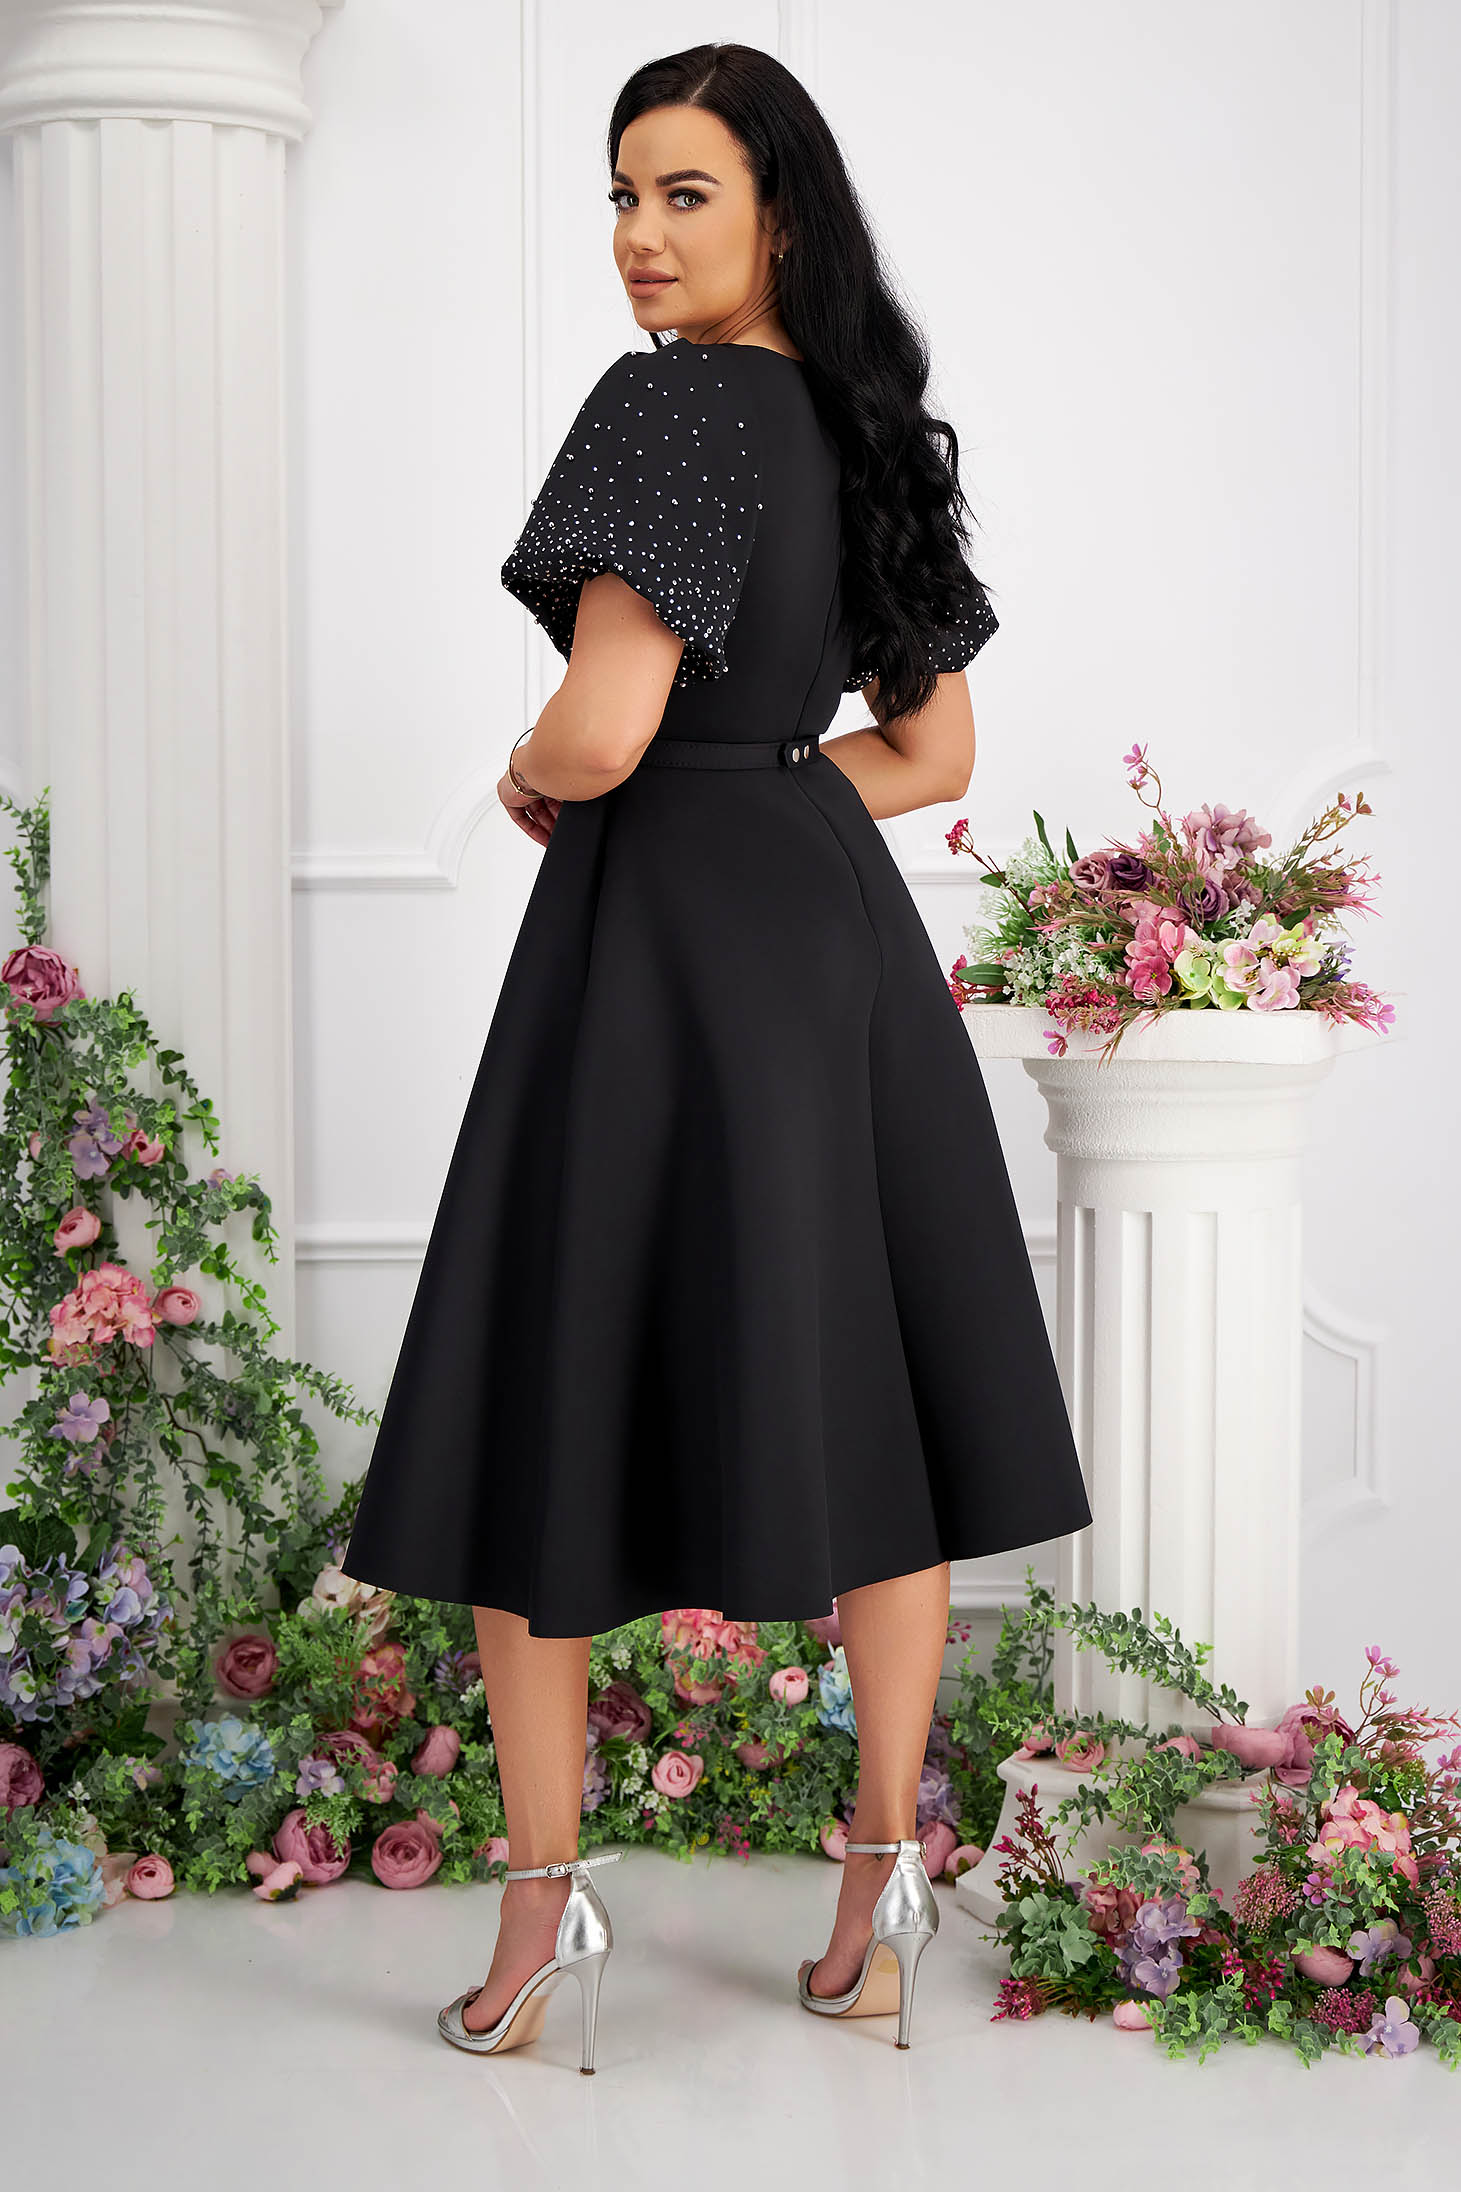 Black neoprene midi skater dress with side pockets and puffed sleeves with rhinestones 4 - StarShinerS.com